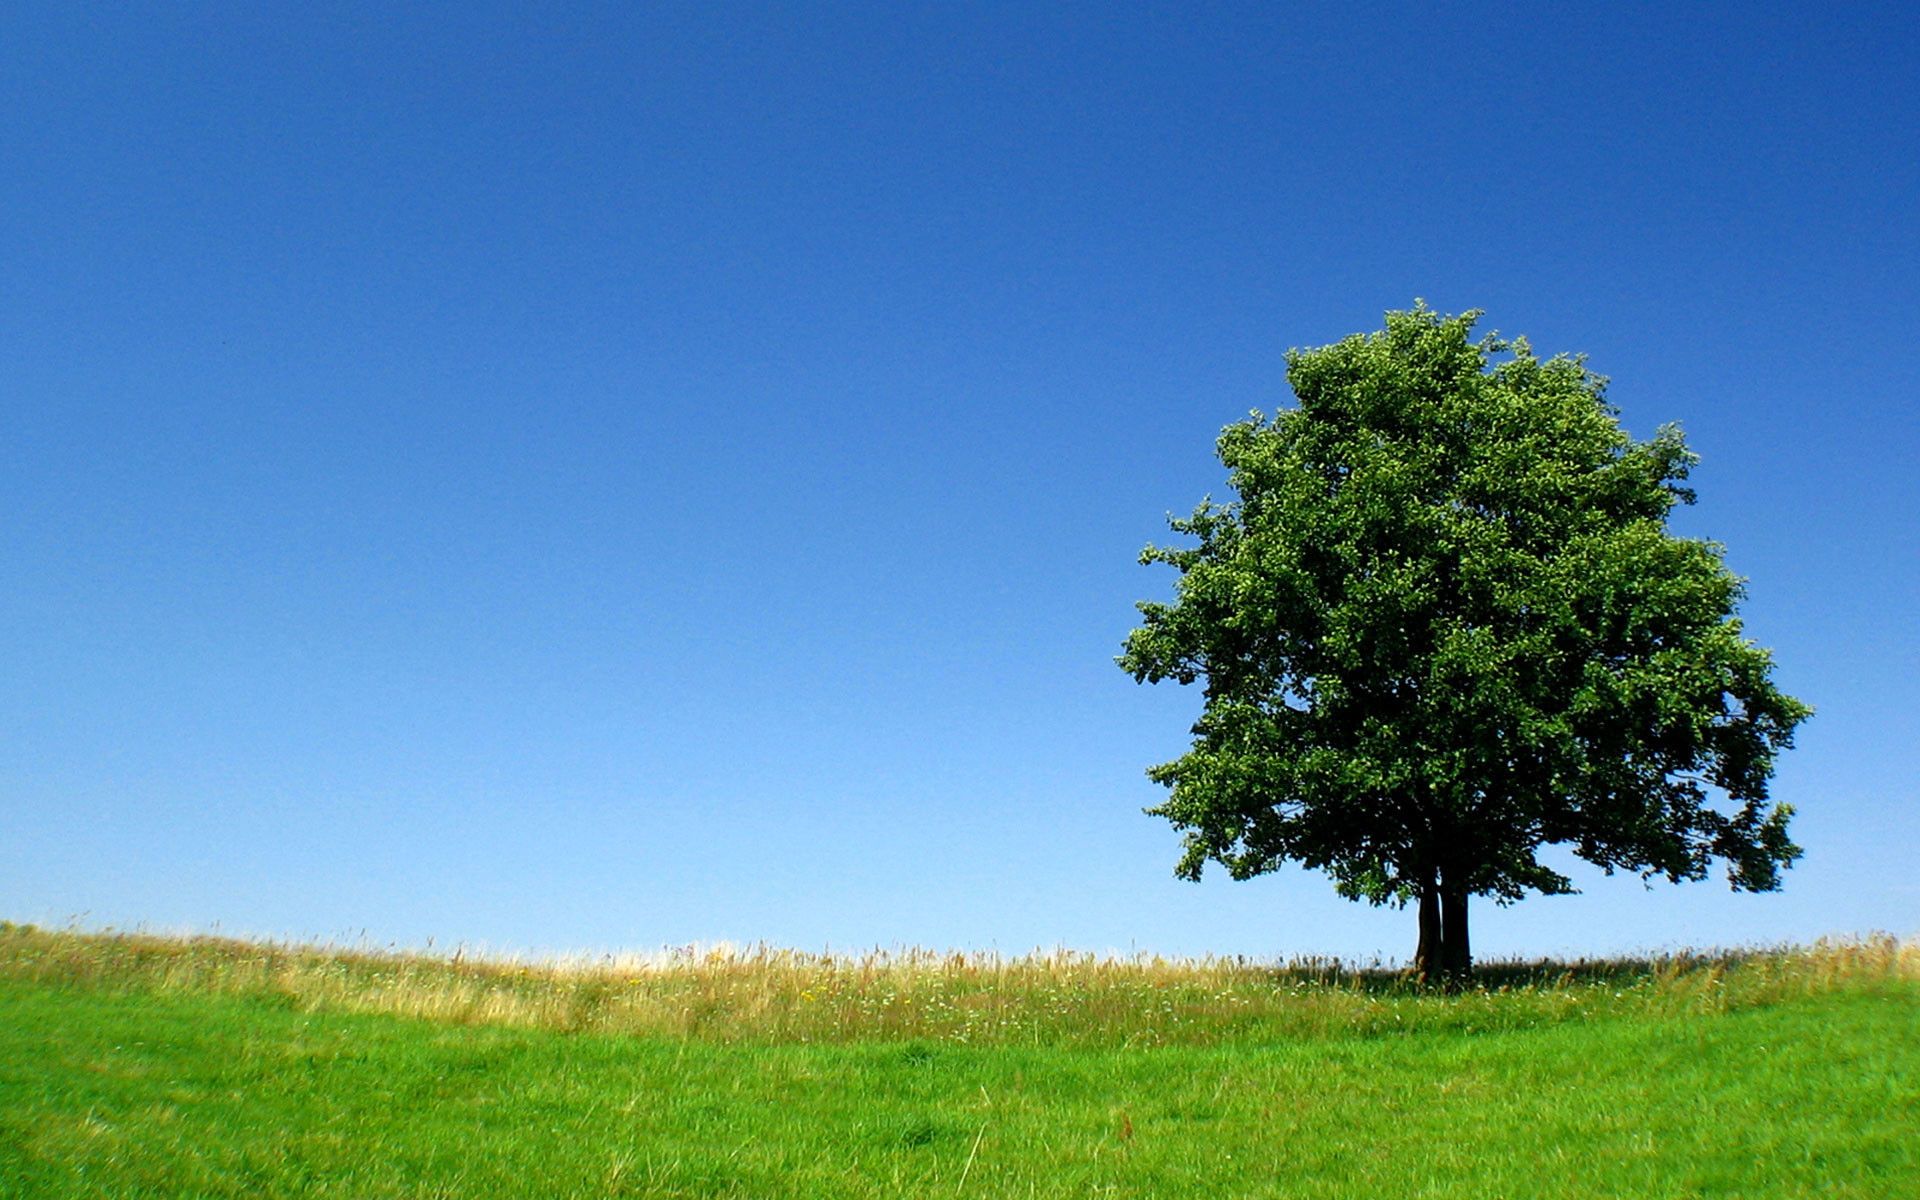 Background Pictures For Desktop Free Download 12 Photos - Beautiful Tree - HD Wallpaper 